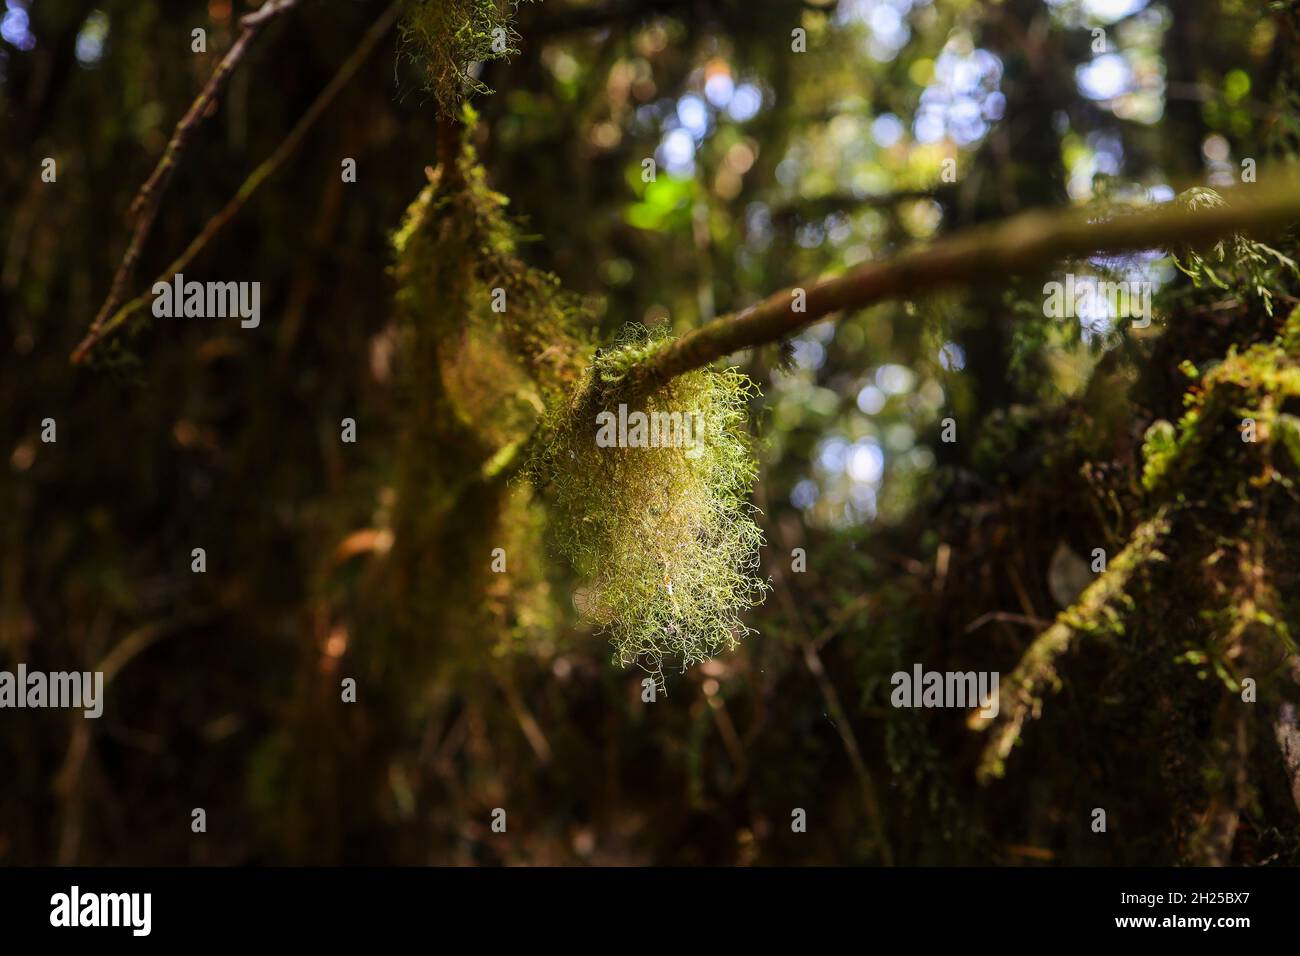 Beard lichen and moss growing in a mossy rainforest Stock Photo